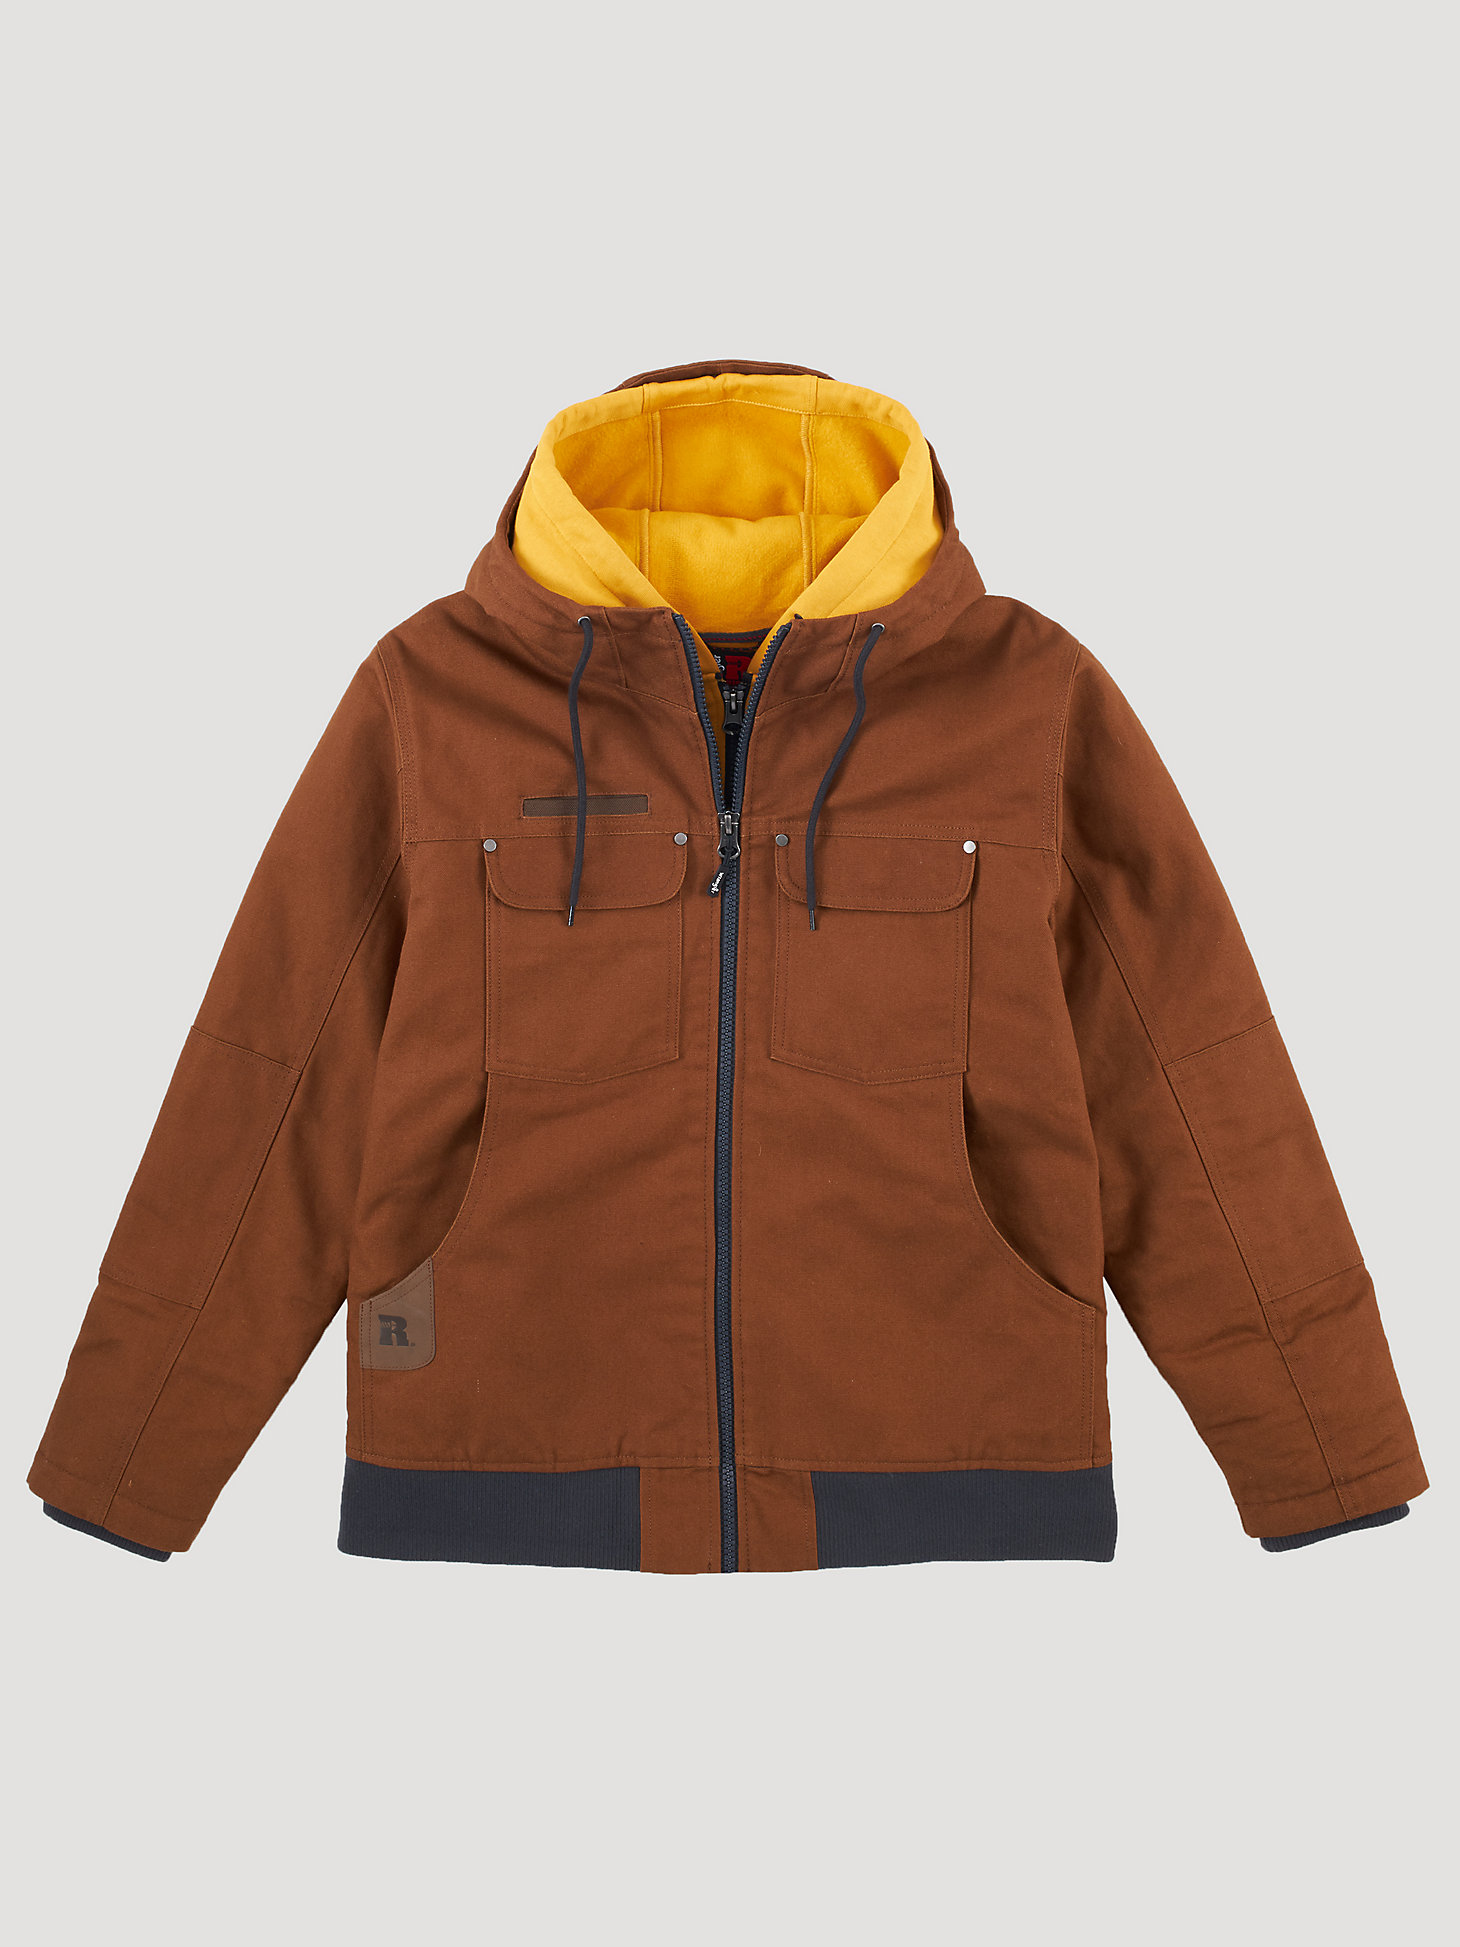 Wrangler® RIGGS Workwear® Tough Layers Insulated Canvas Work Jacket in Toffee alternative view 6